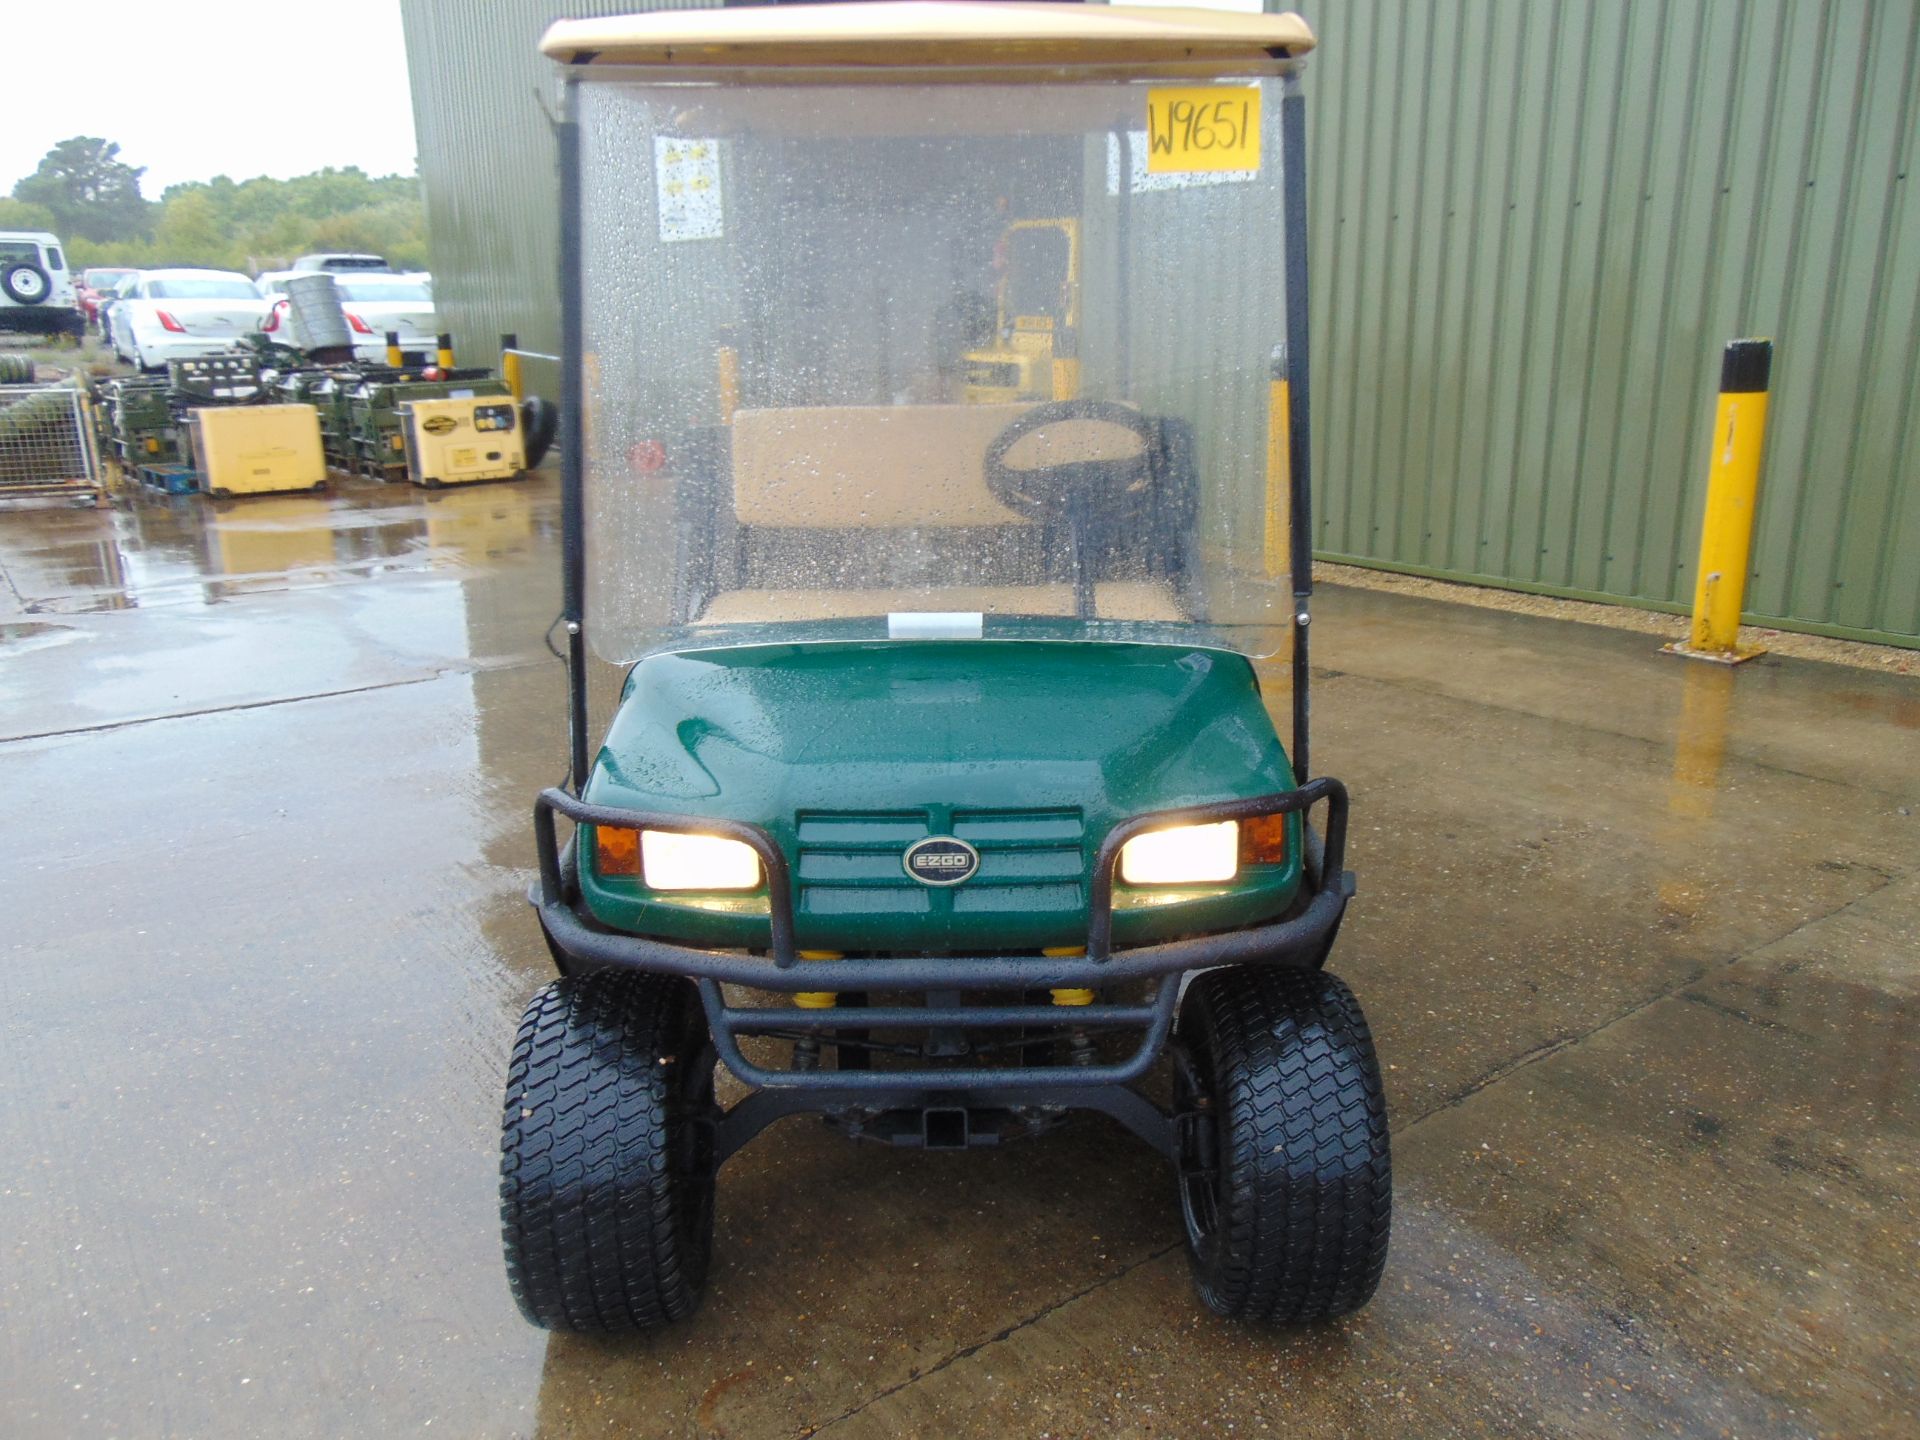 E-Z-GO Lifted Estate/Grounds Vehicle c/w Tipping Rear Body Only 889 Hours! - Image 2 of 21